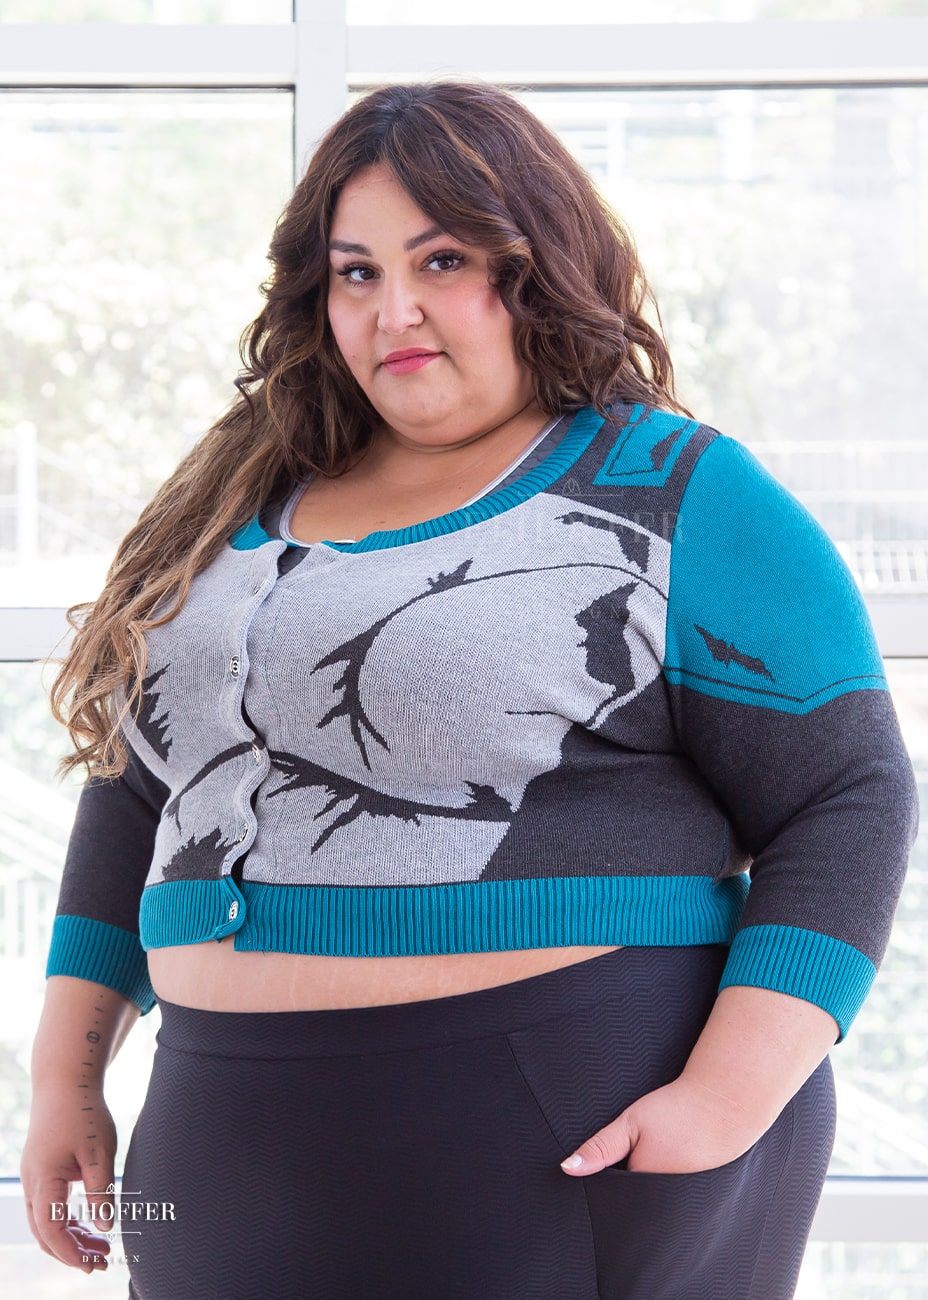 Kristen, a sun kissed skin 4xl model with long wavy brown hair, is wearing a cropped button up knit cardigan with 3/4 sleeves. The cardigan front is mainly a light grey with dark grey decorative lines that give the impression of battle damaged armor, with teal at the shoulders, and the bottom half of the sleeve and back of the cardigan are a dark grey. The neckine, bottom, and cuffs are all teal ribbing.